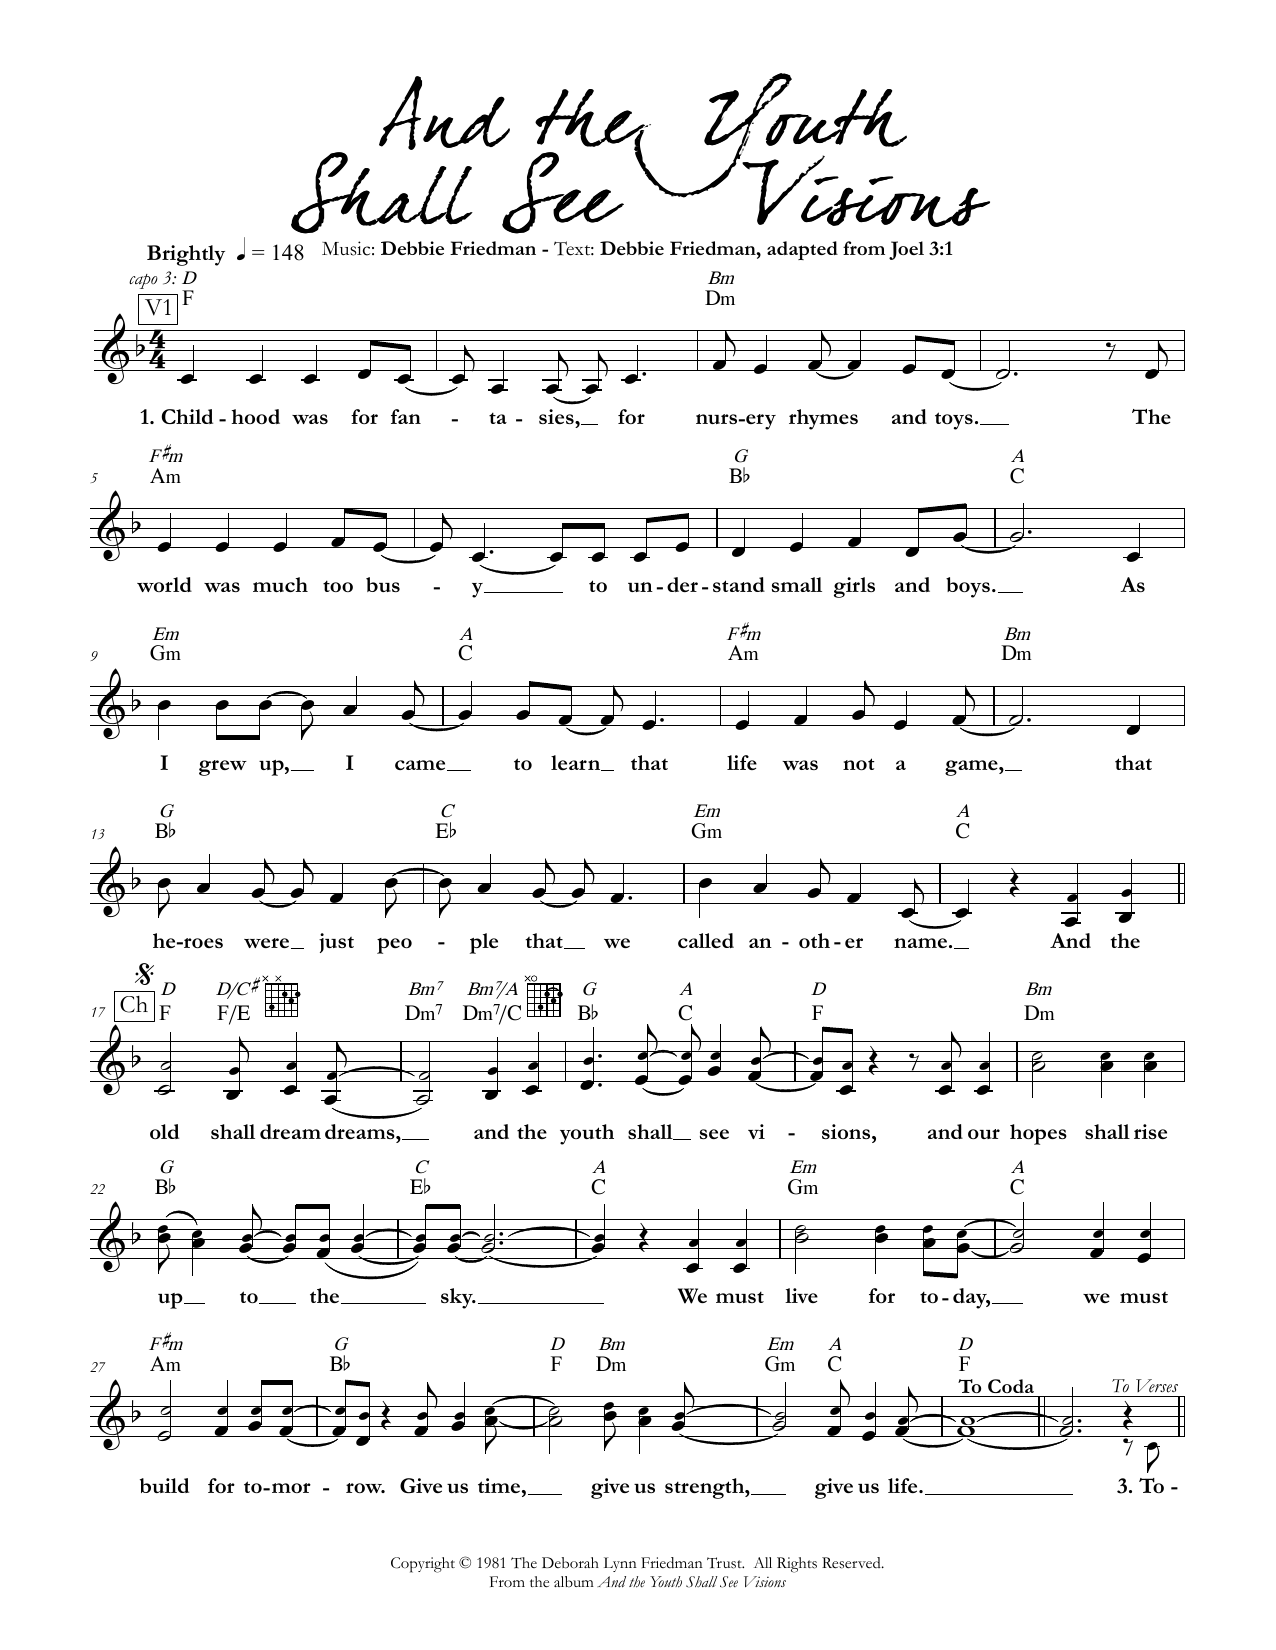 Download Debbie Friedman And the Youth Shall See Visions Sheet Music